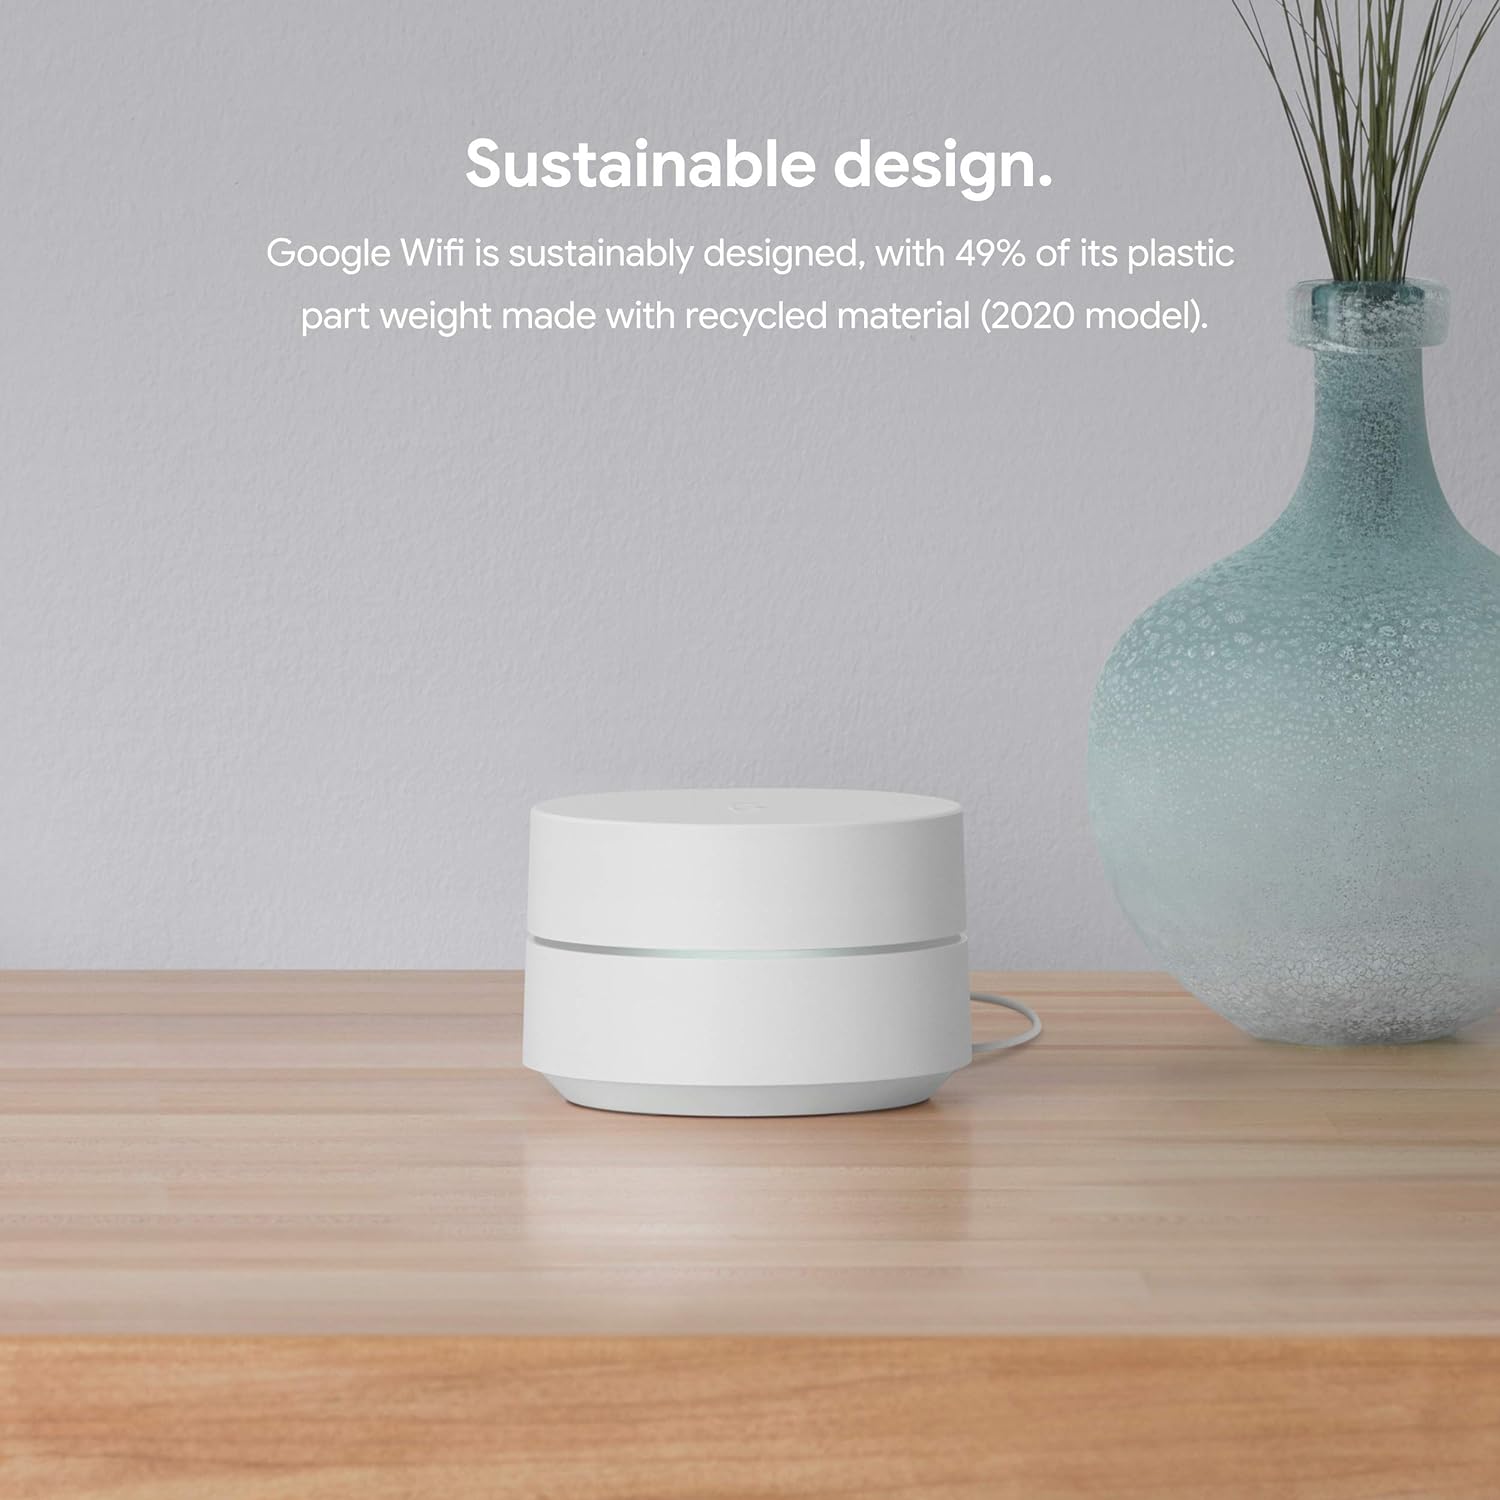 Google - Wifi - Mesh Router (AC1200) - 3 pack - $85